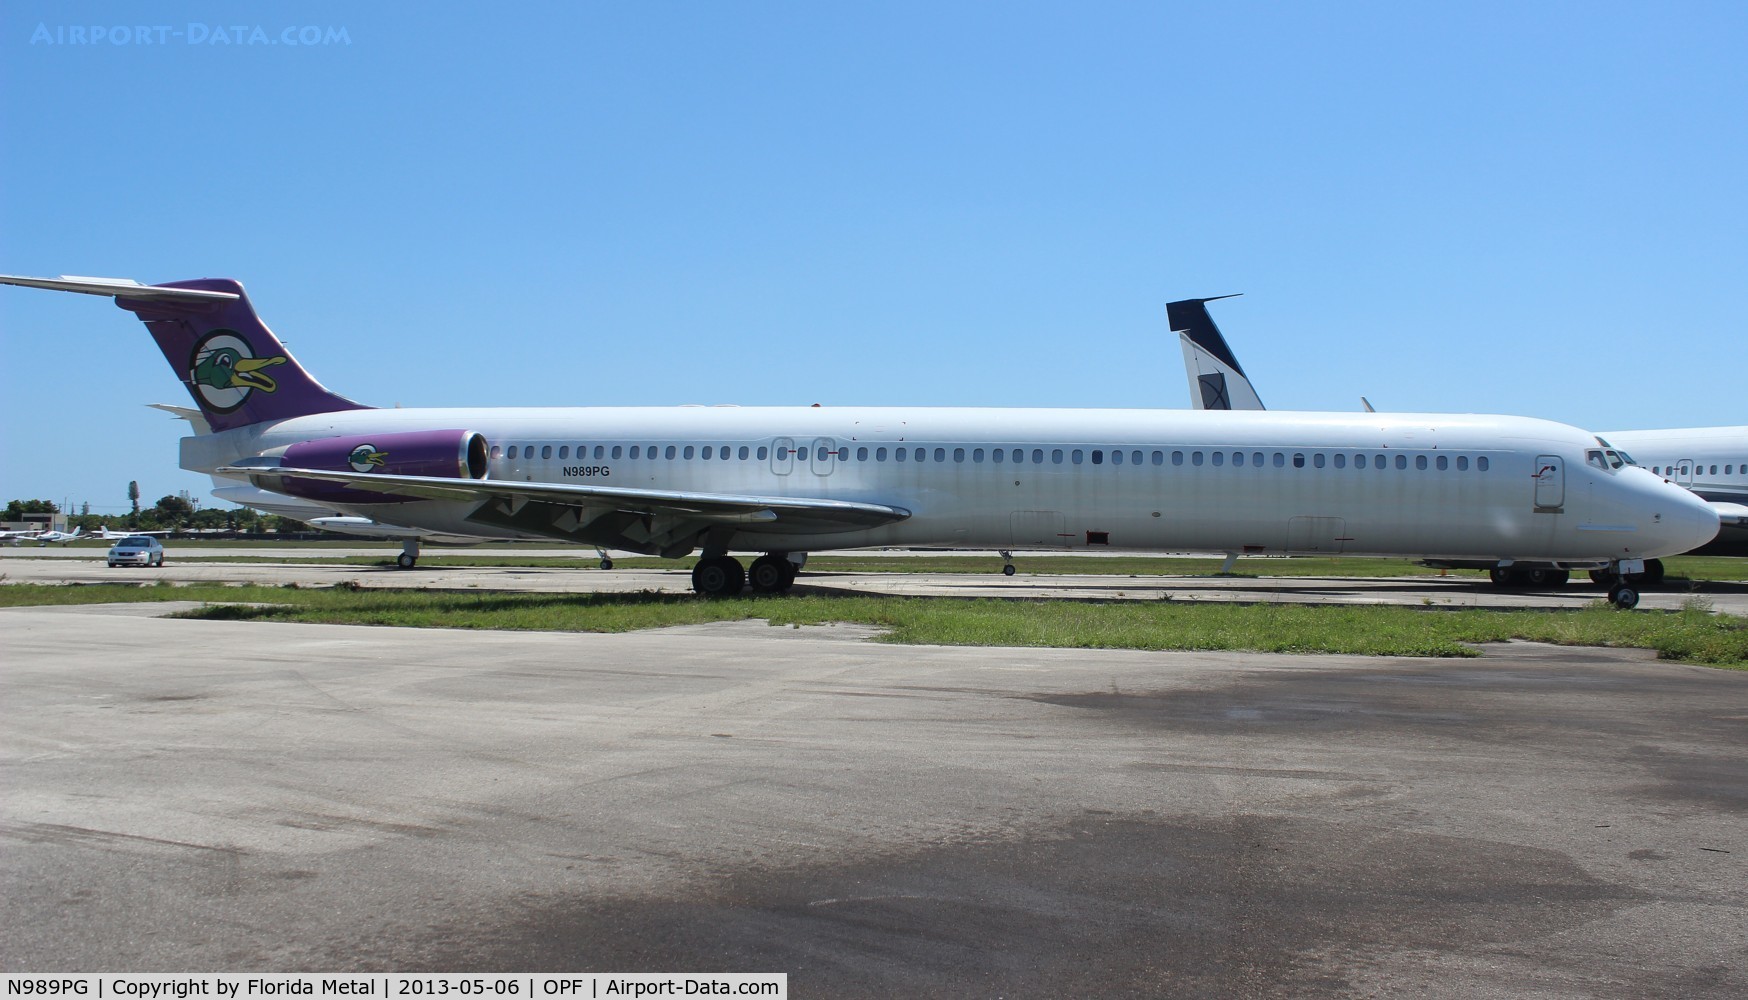 N989PG, 1989 McDonnell Douglas MD-83 (DC-9-83) C/N 49845, Pegasus Aviation but still in LEAL Lineas Aereas of Argentina colors